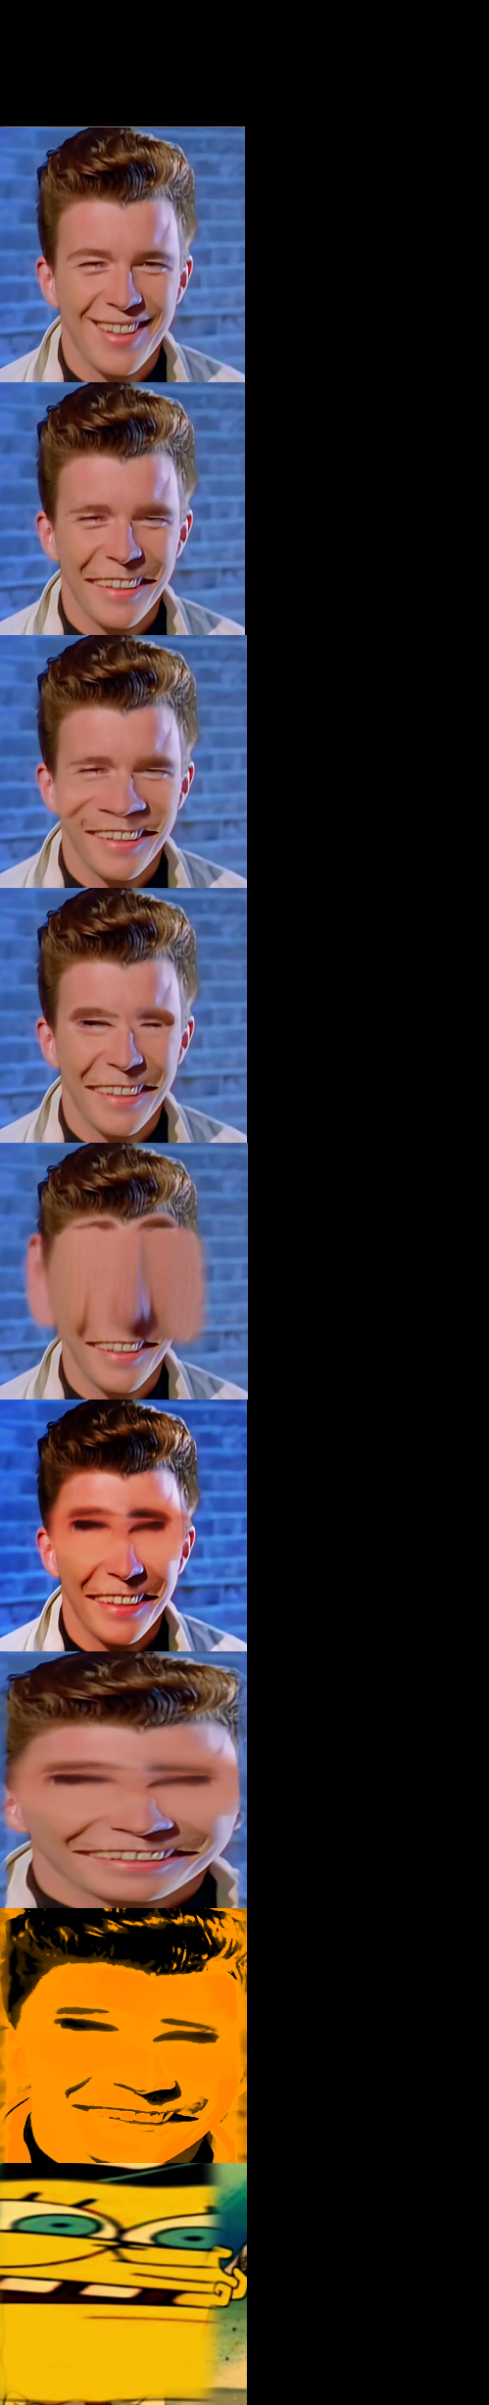 High Quality Rick Astley Becoming Idiot Blank Meme Template